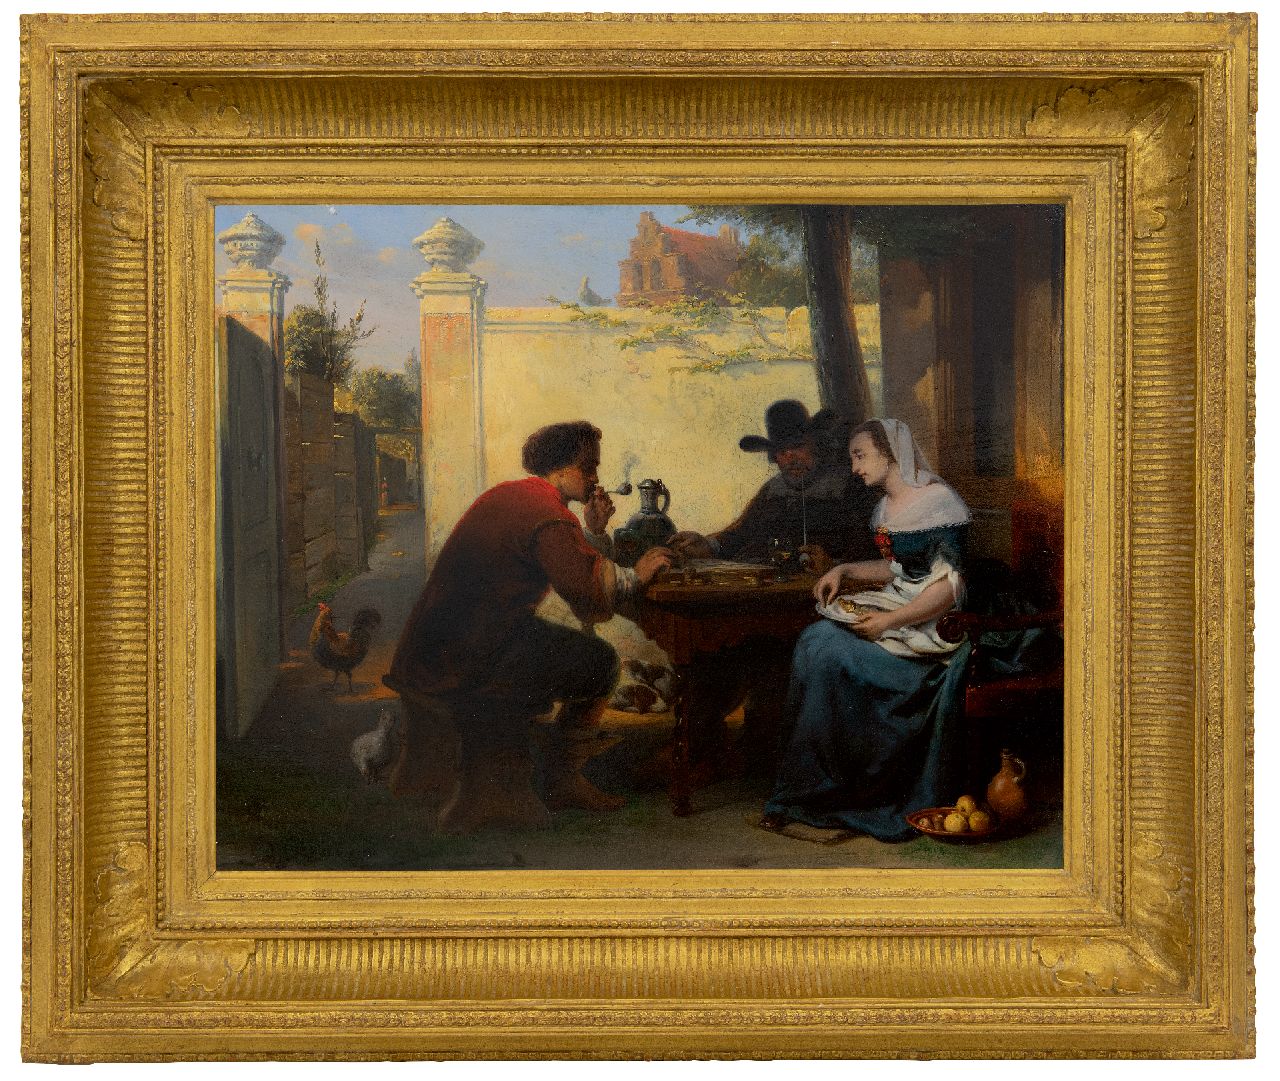 Laar J.H. van de | Jan Hendrik van de Laar | Paintings offered for sale | Playing checkers in the courtyard, oil on panel 40.8 x 51.1 cm, signed l.l. on the bench and dated 1864